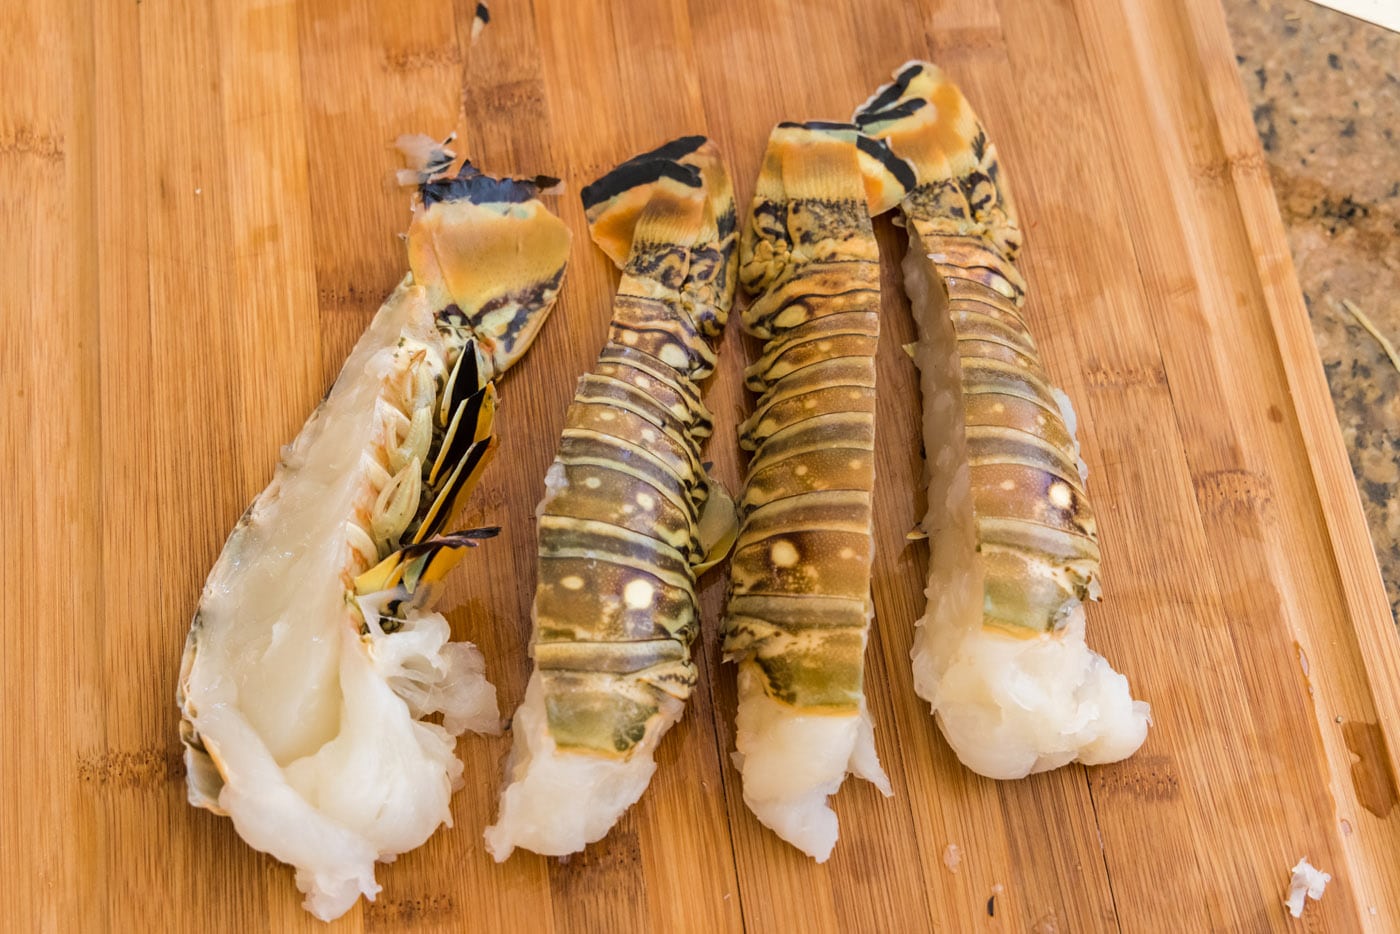 lobster tails cut in half lengthwise